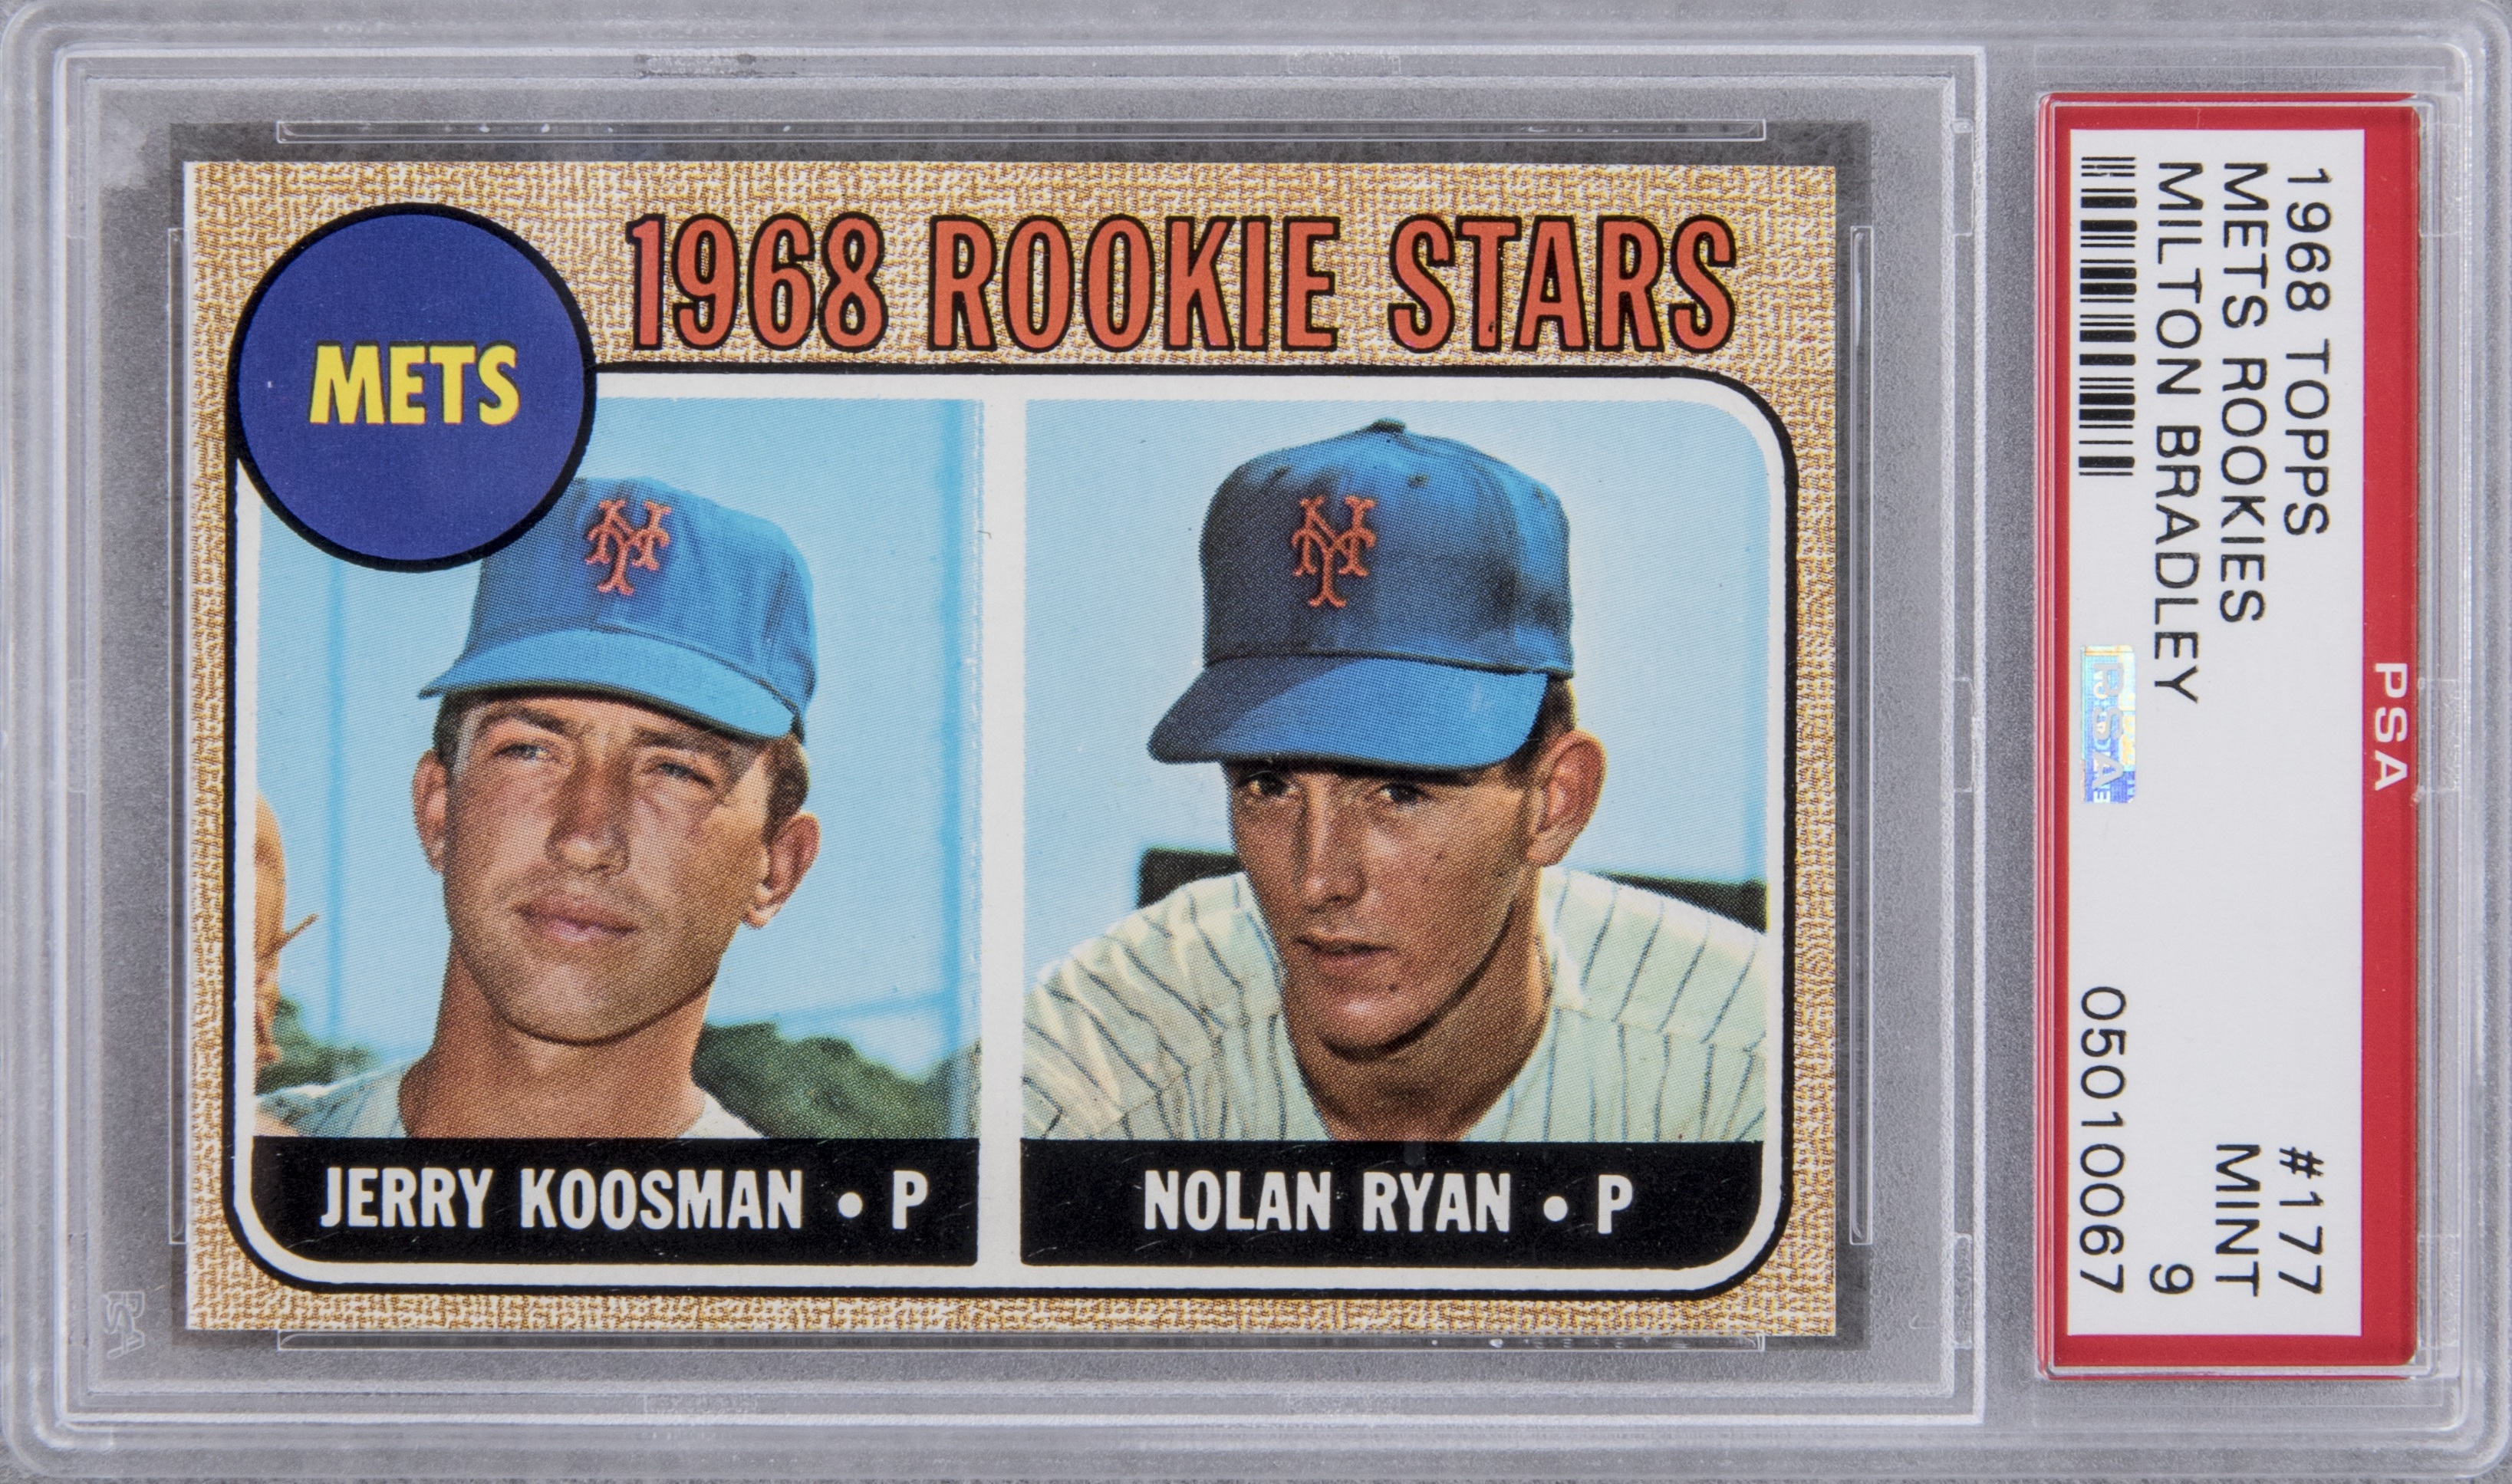 8 Topps Nolan Ryan Rookie Card The Ultimate Collector's Guide ...